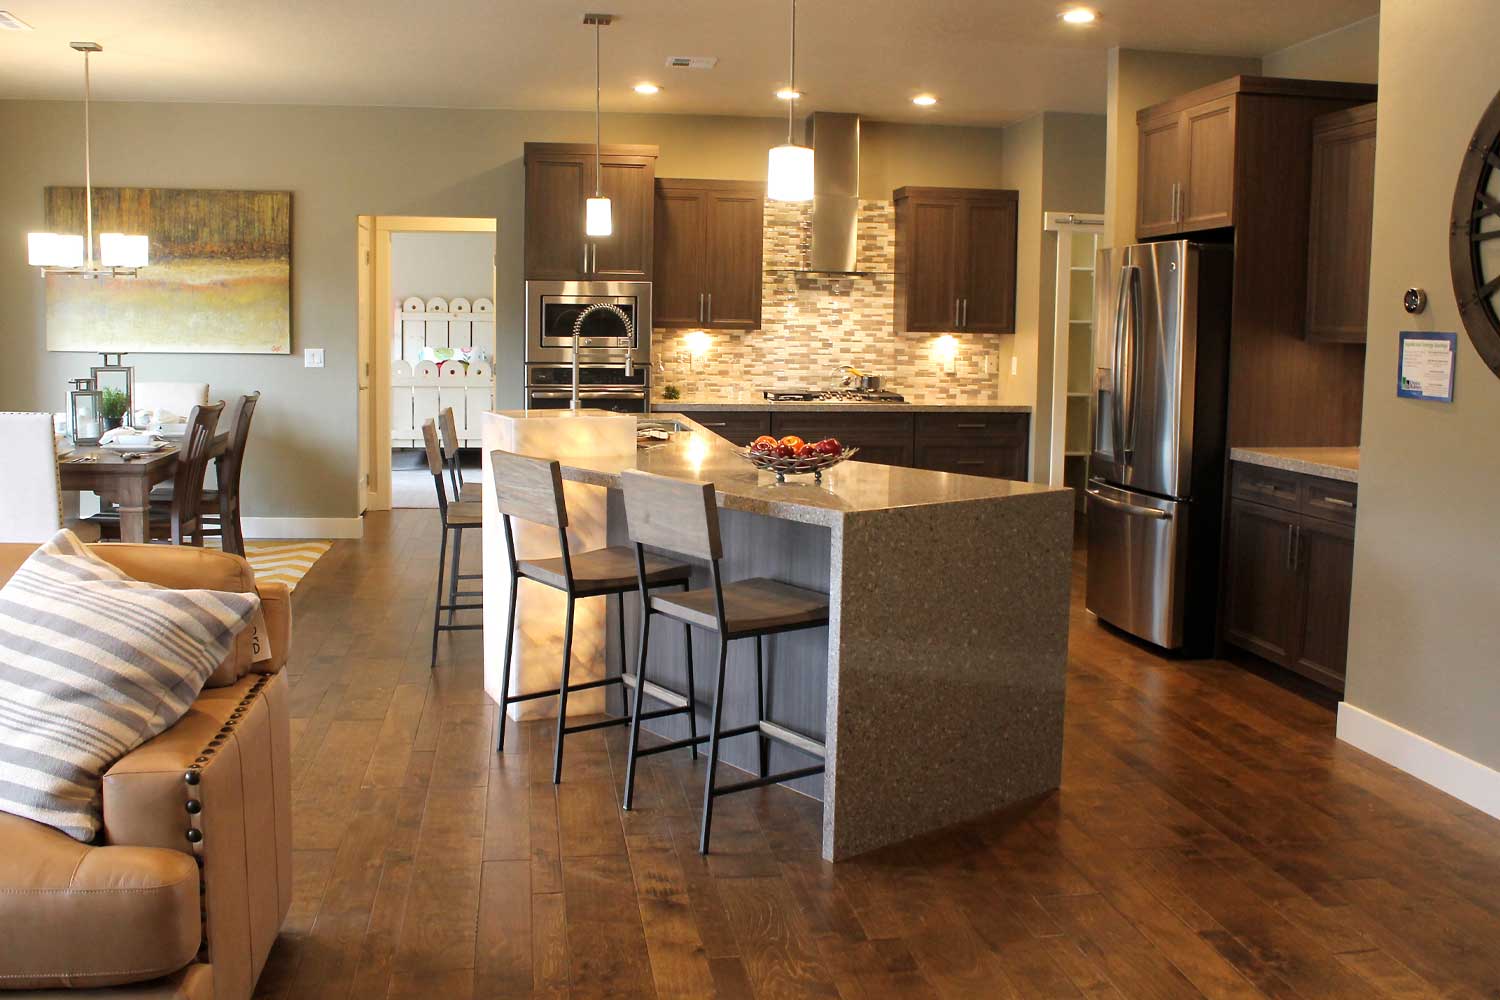 kitchen counter with two bar stools, hard wood flooring, ceiling lights